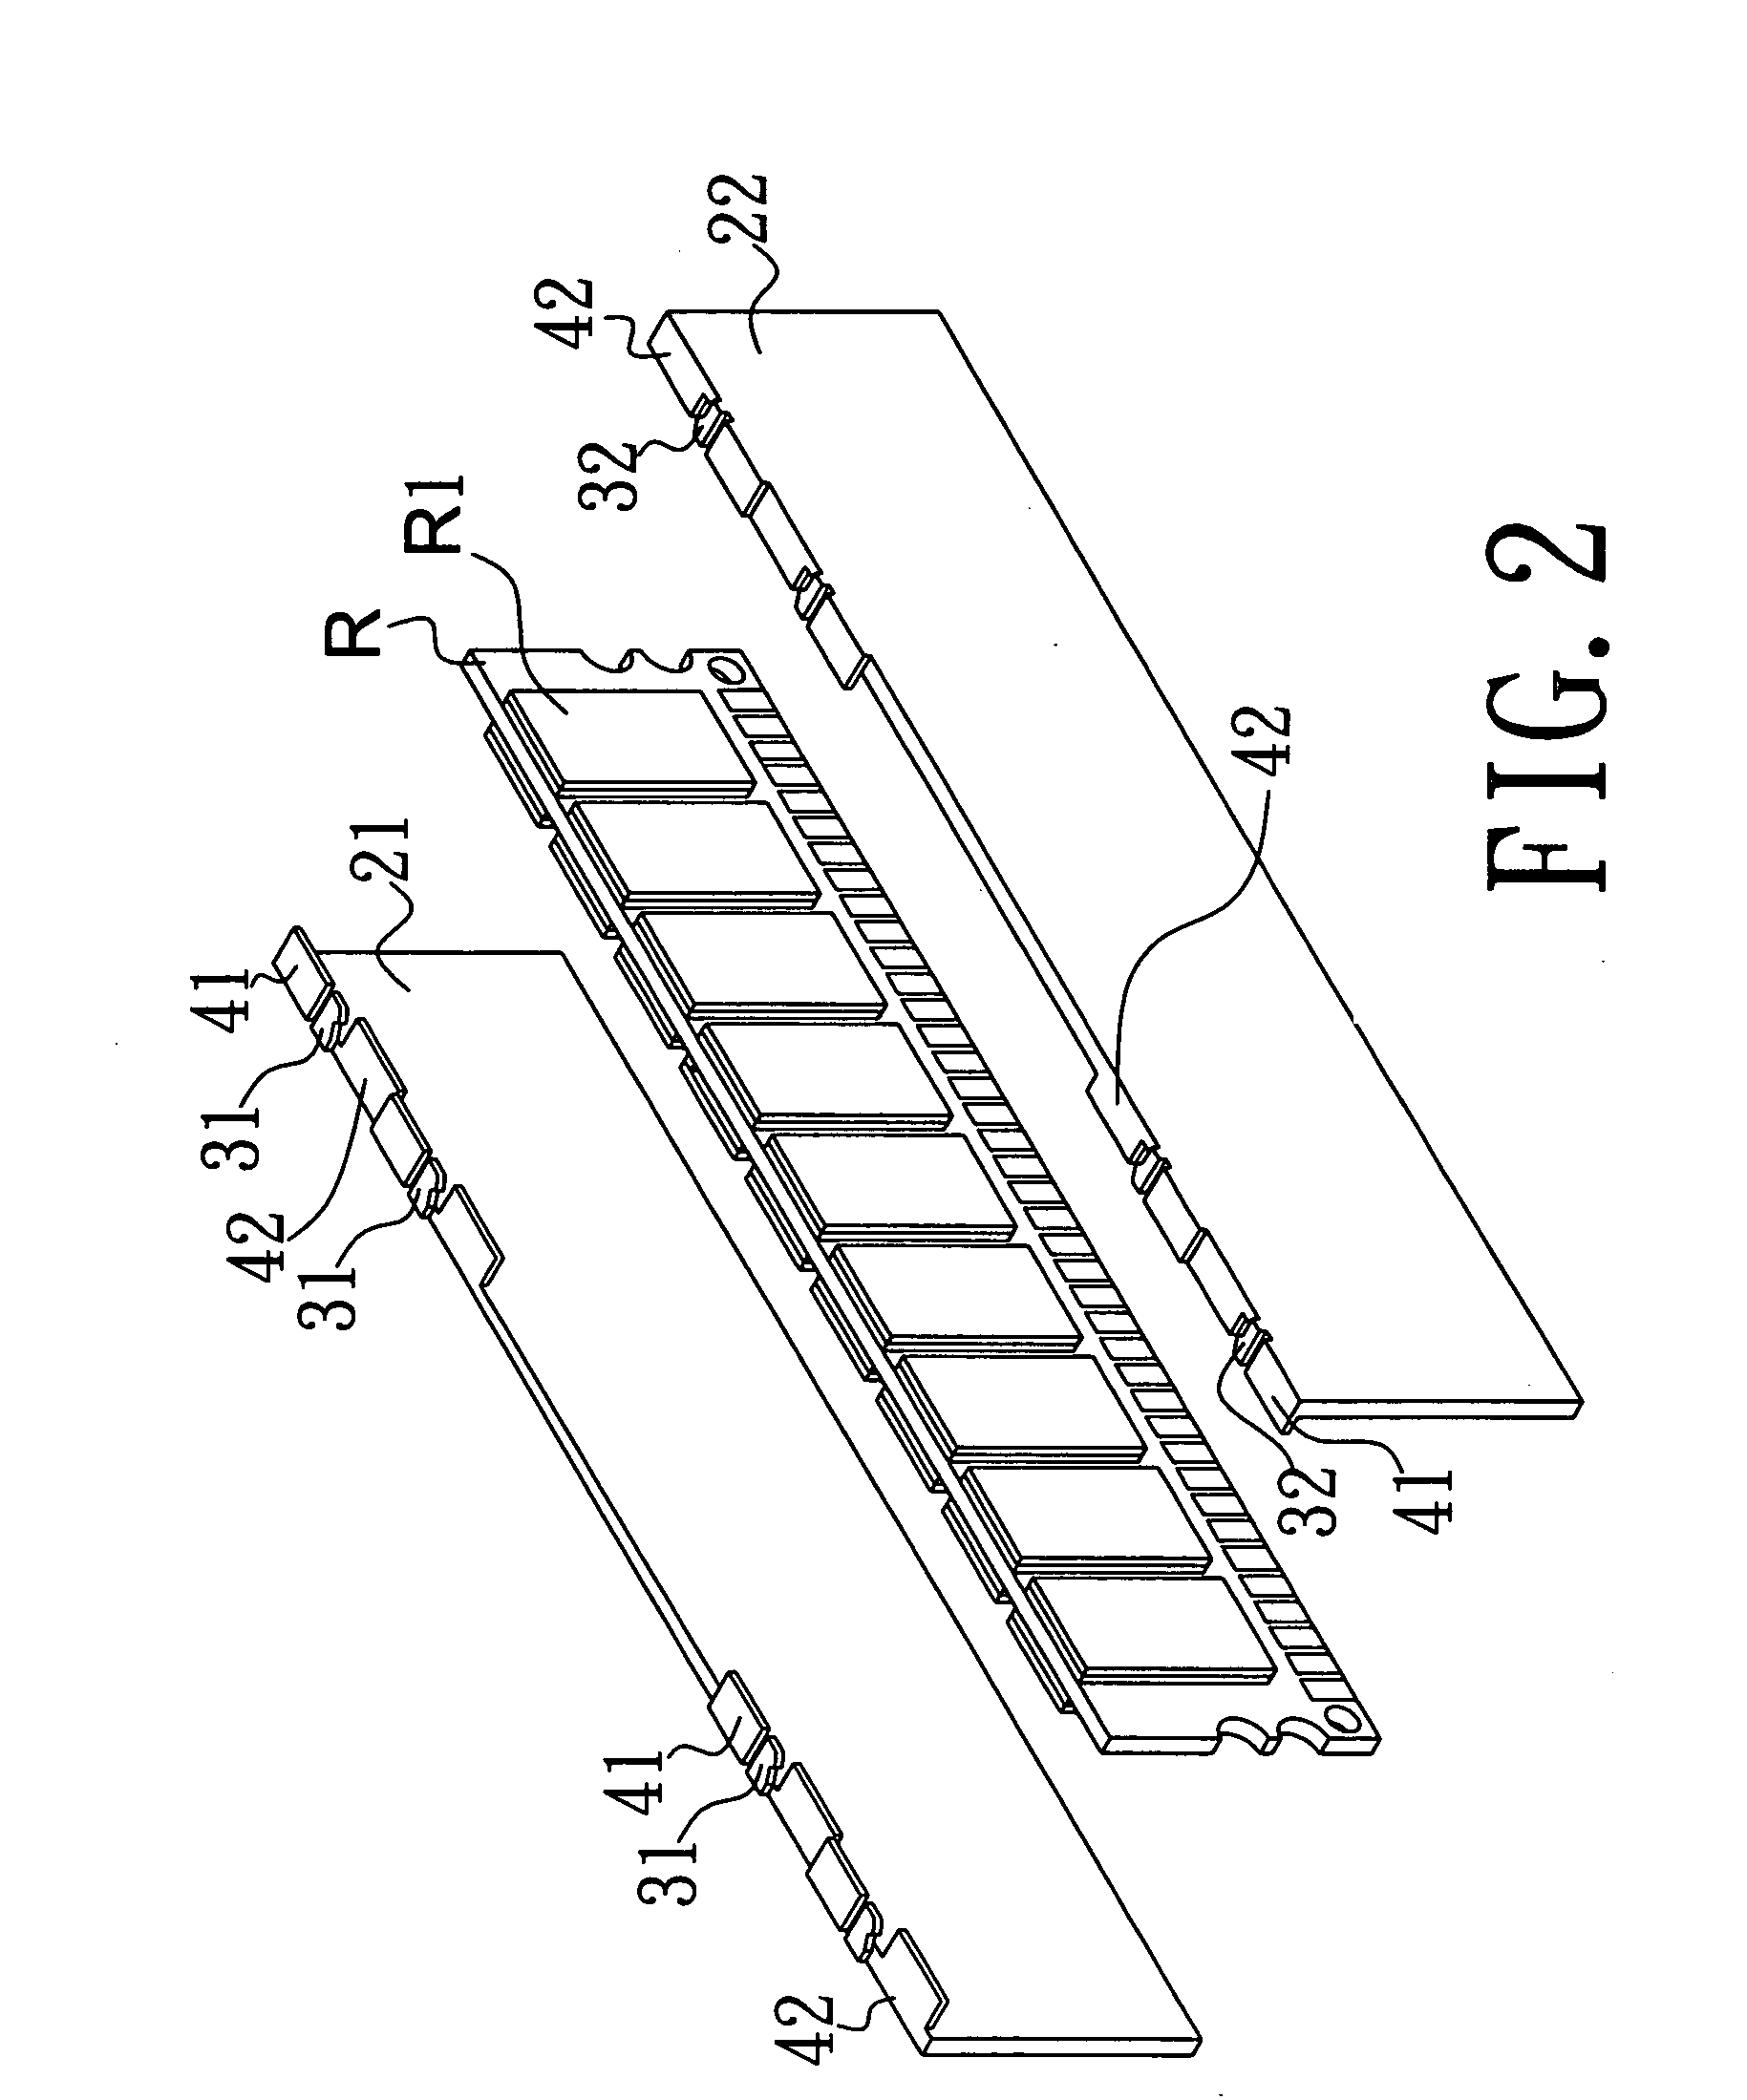 Heat-dissipating assembly structure